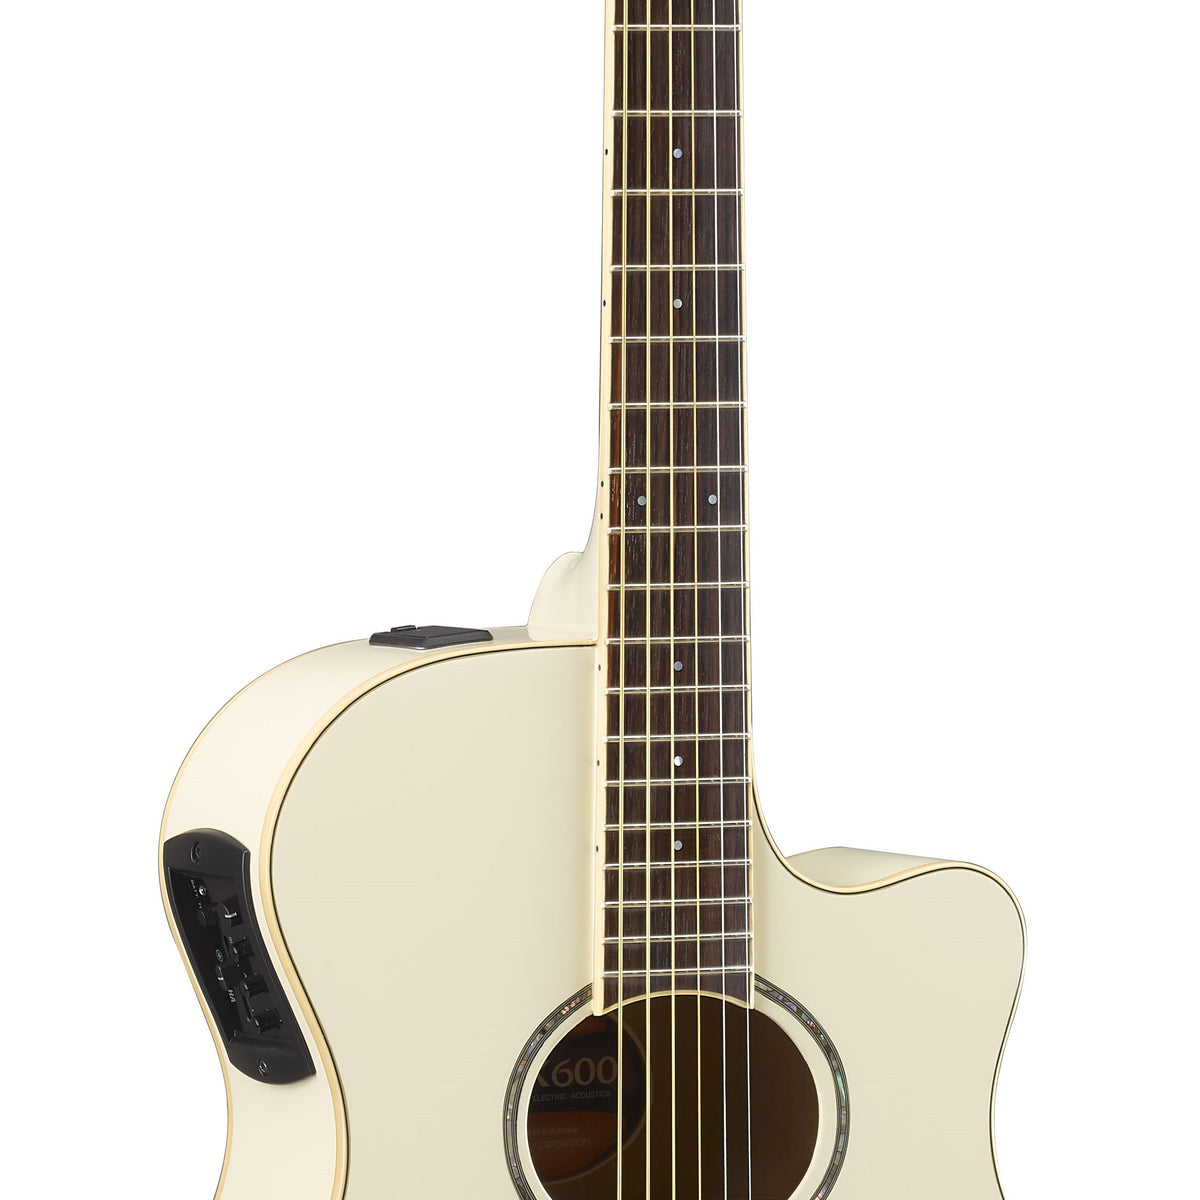 Yamaha APX600 Electro-Acoustic Guitar, Vintage White – A Strings